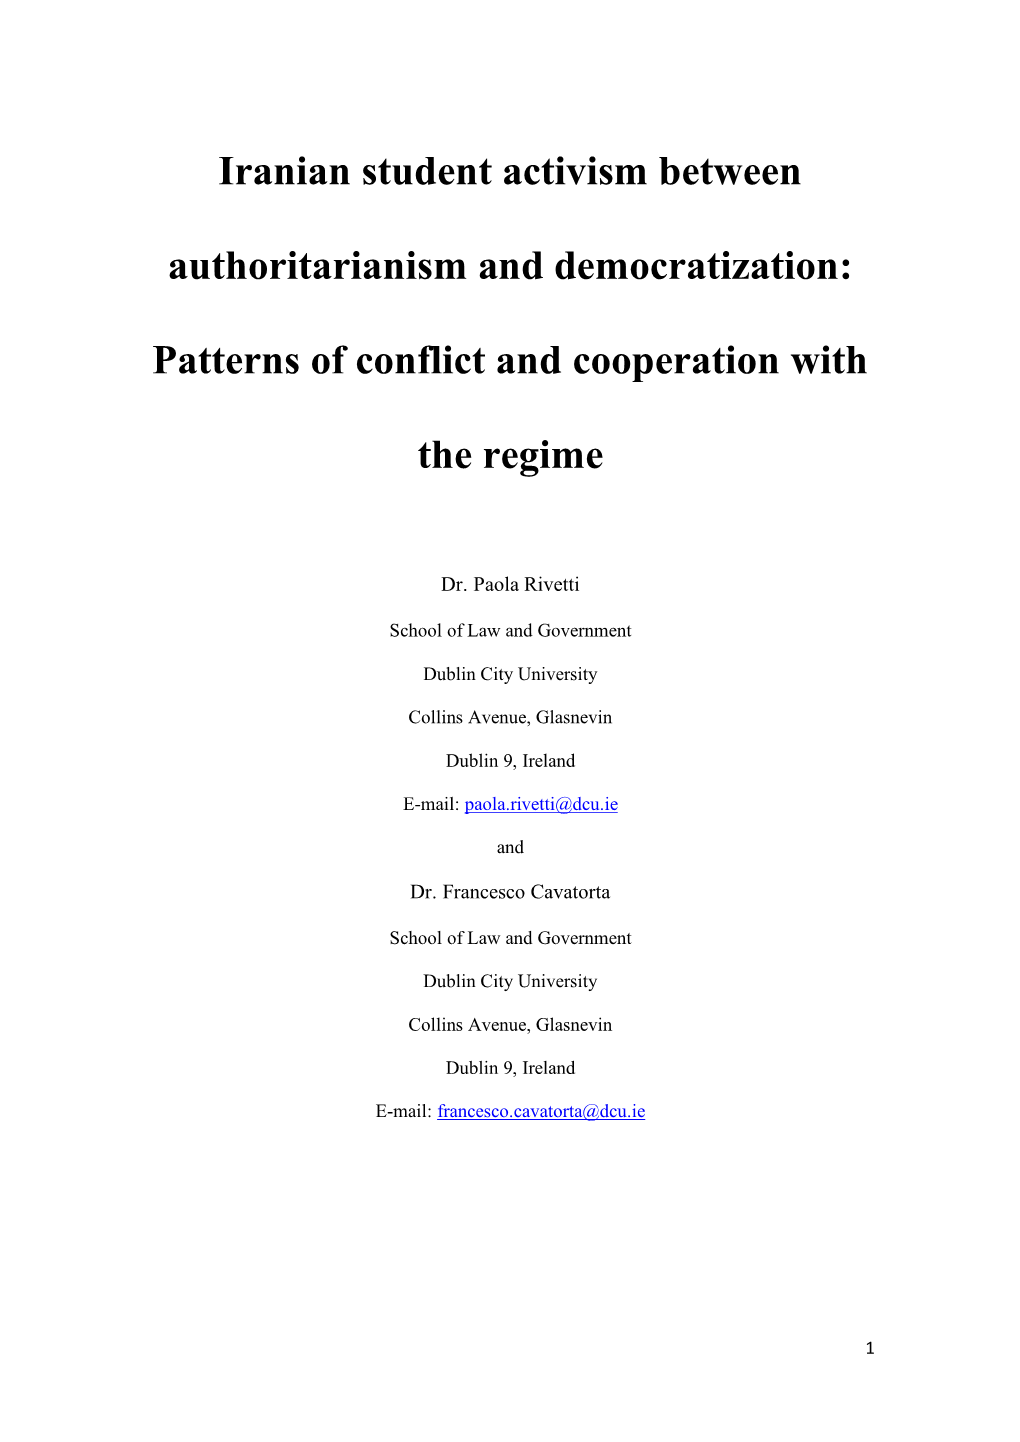 Iranian Student Activism Between Authoritarianism and Democratization: Patterns of Conflict and Cooperation with the Regime